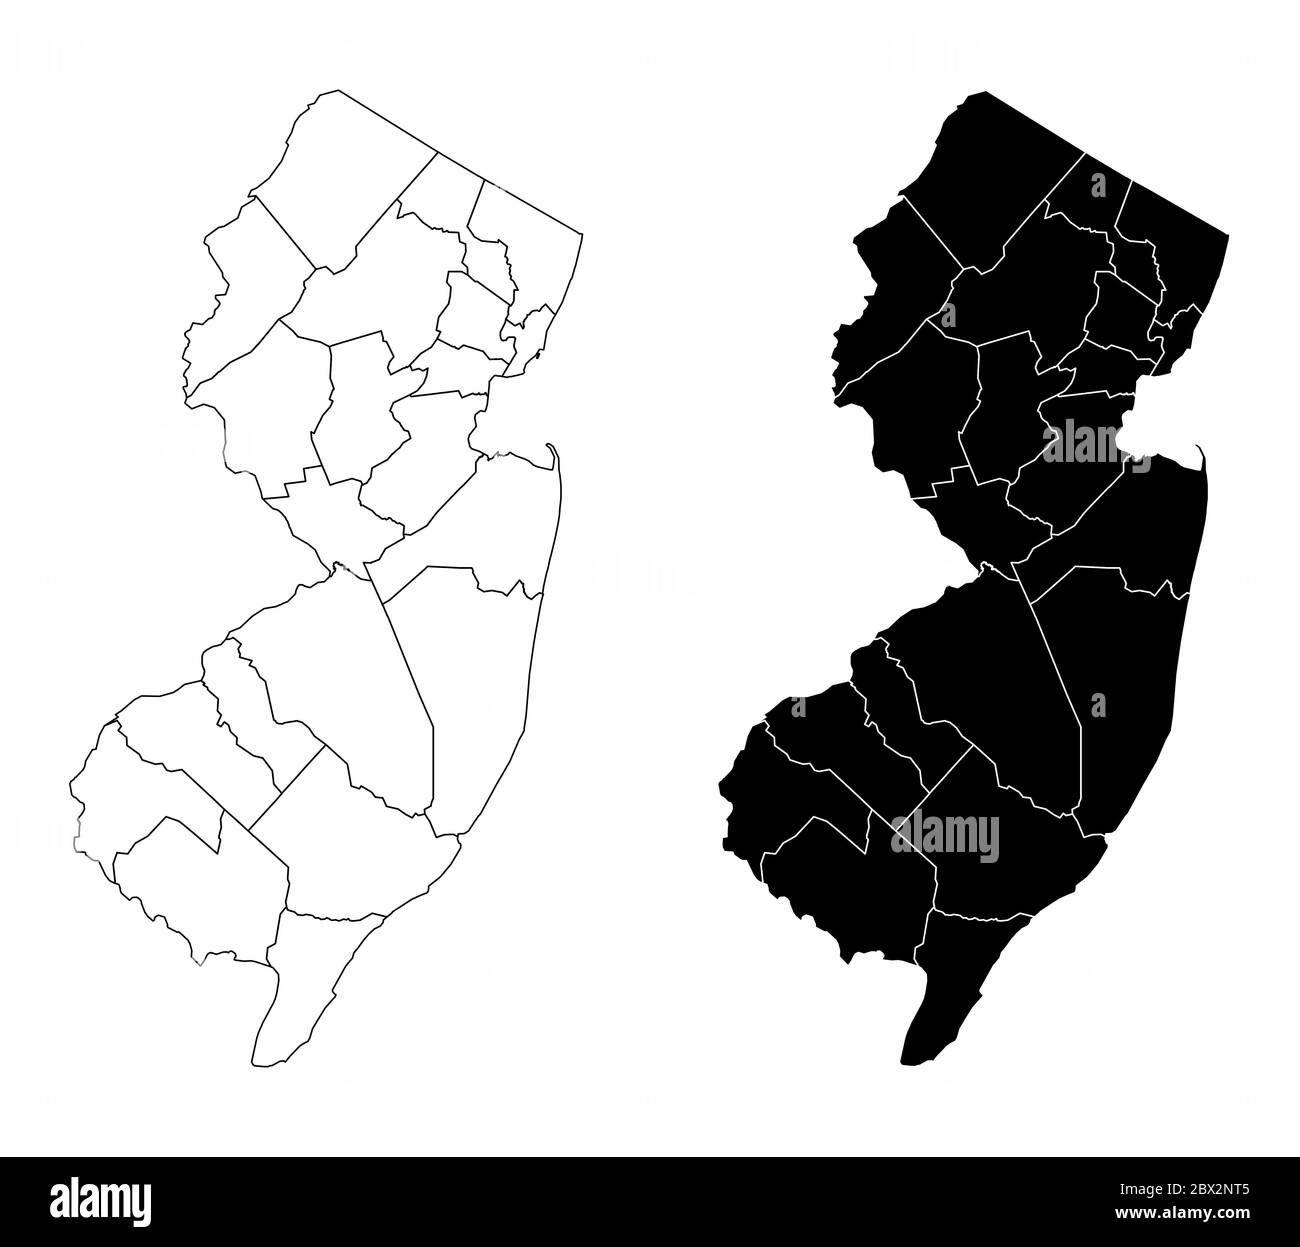 New Jersey county maps Stock Vector